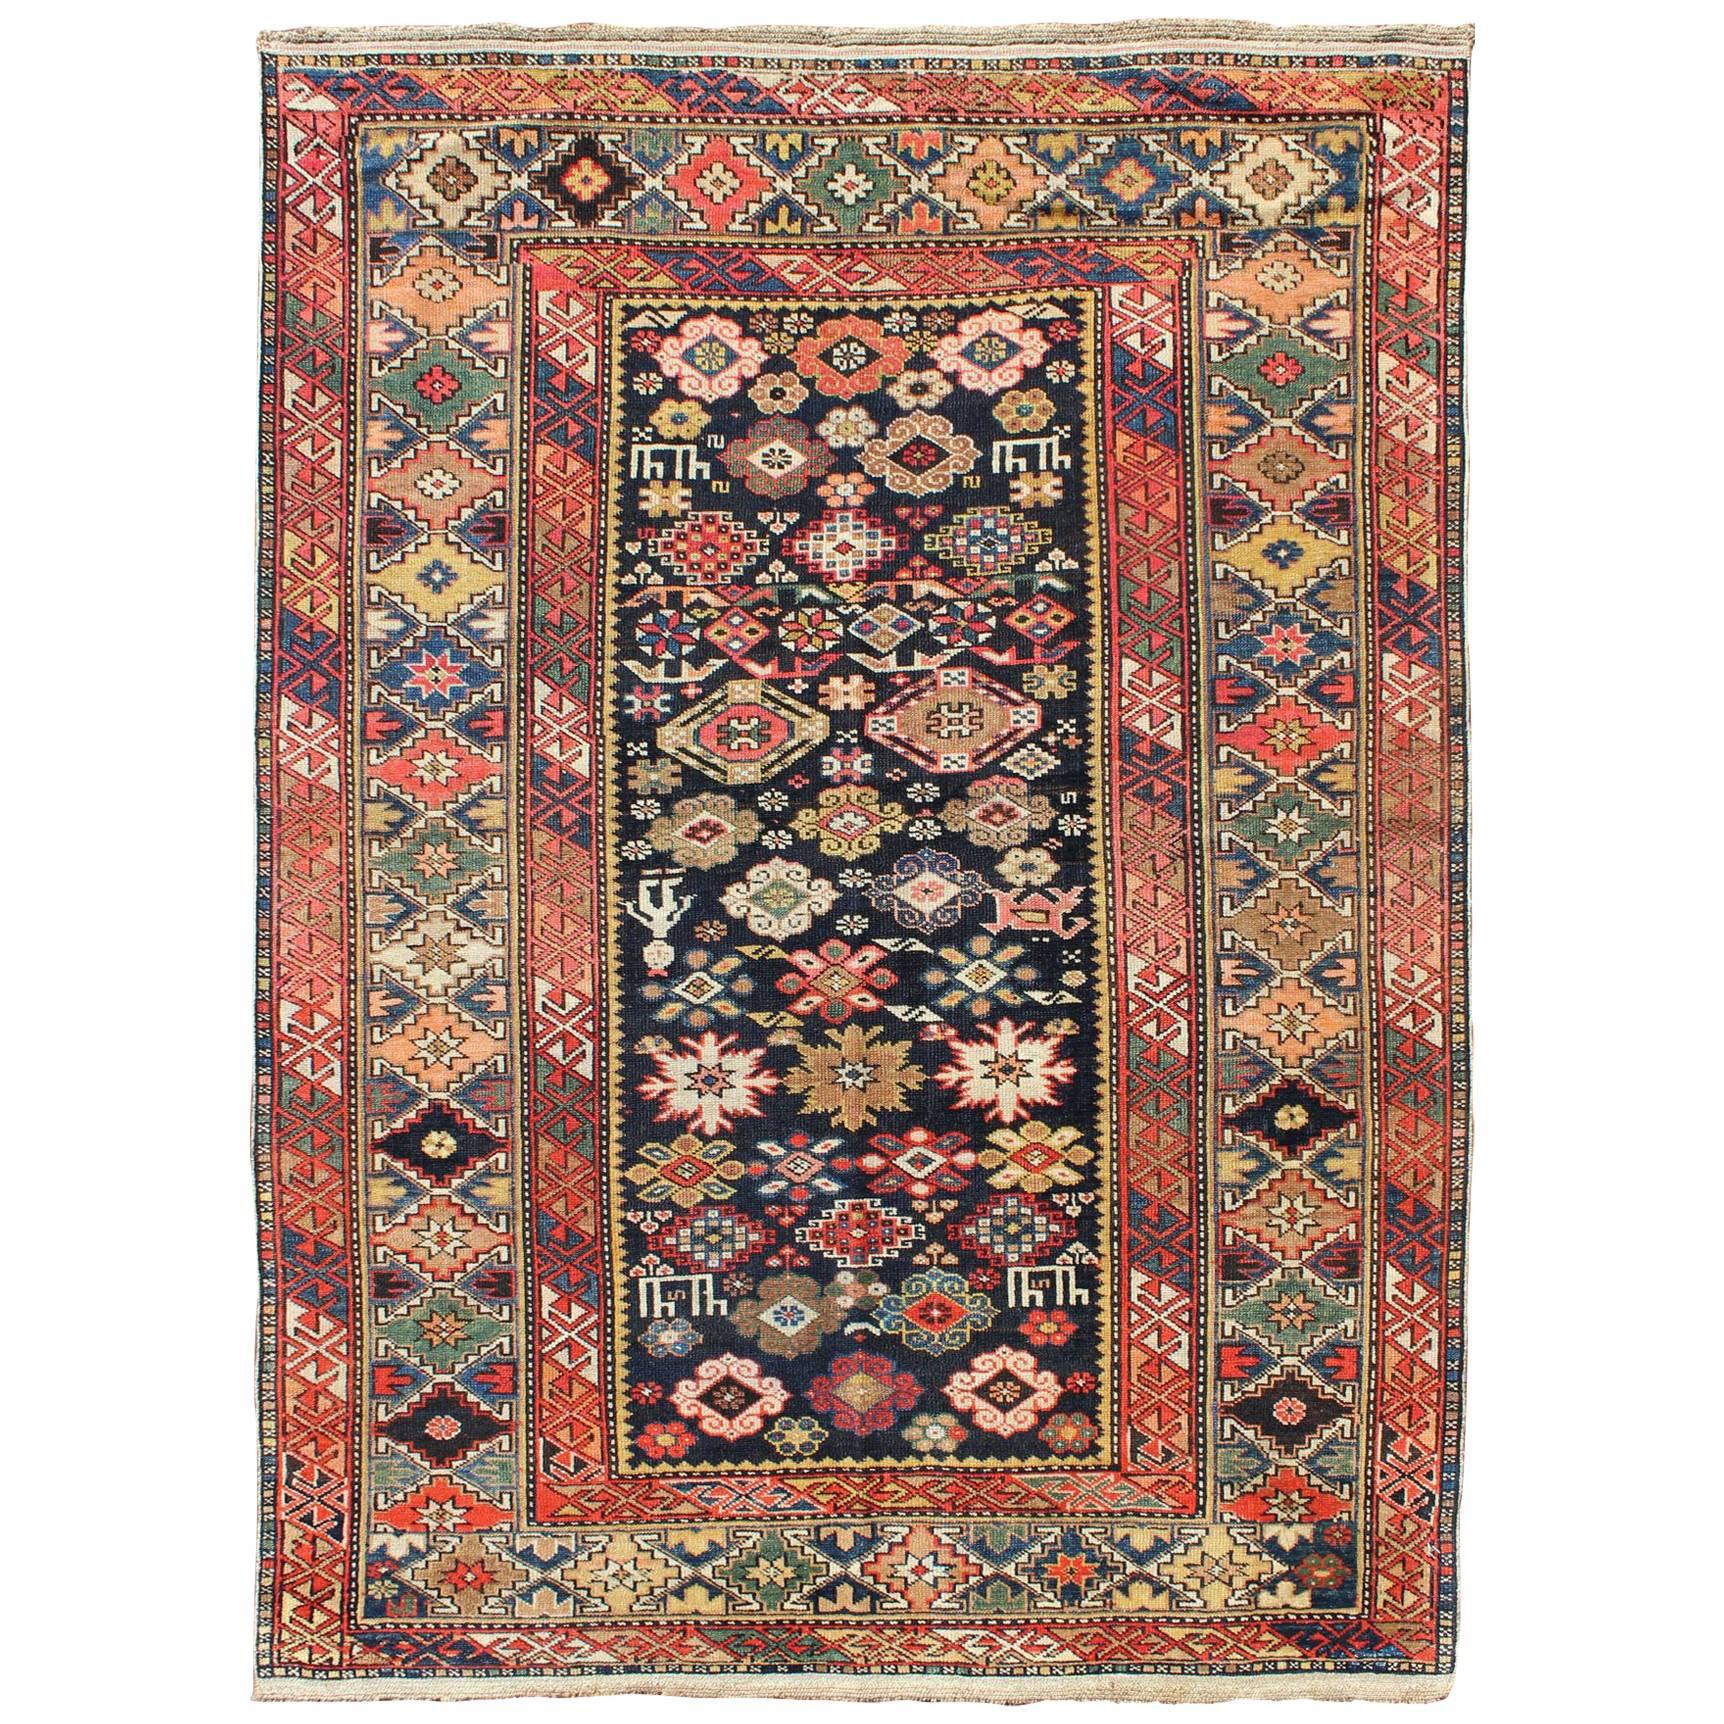 Colorful Antique Kuba Carpet with Intricate Geometric Design For Sale